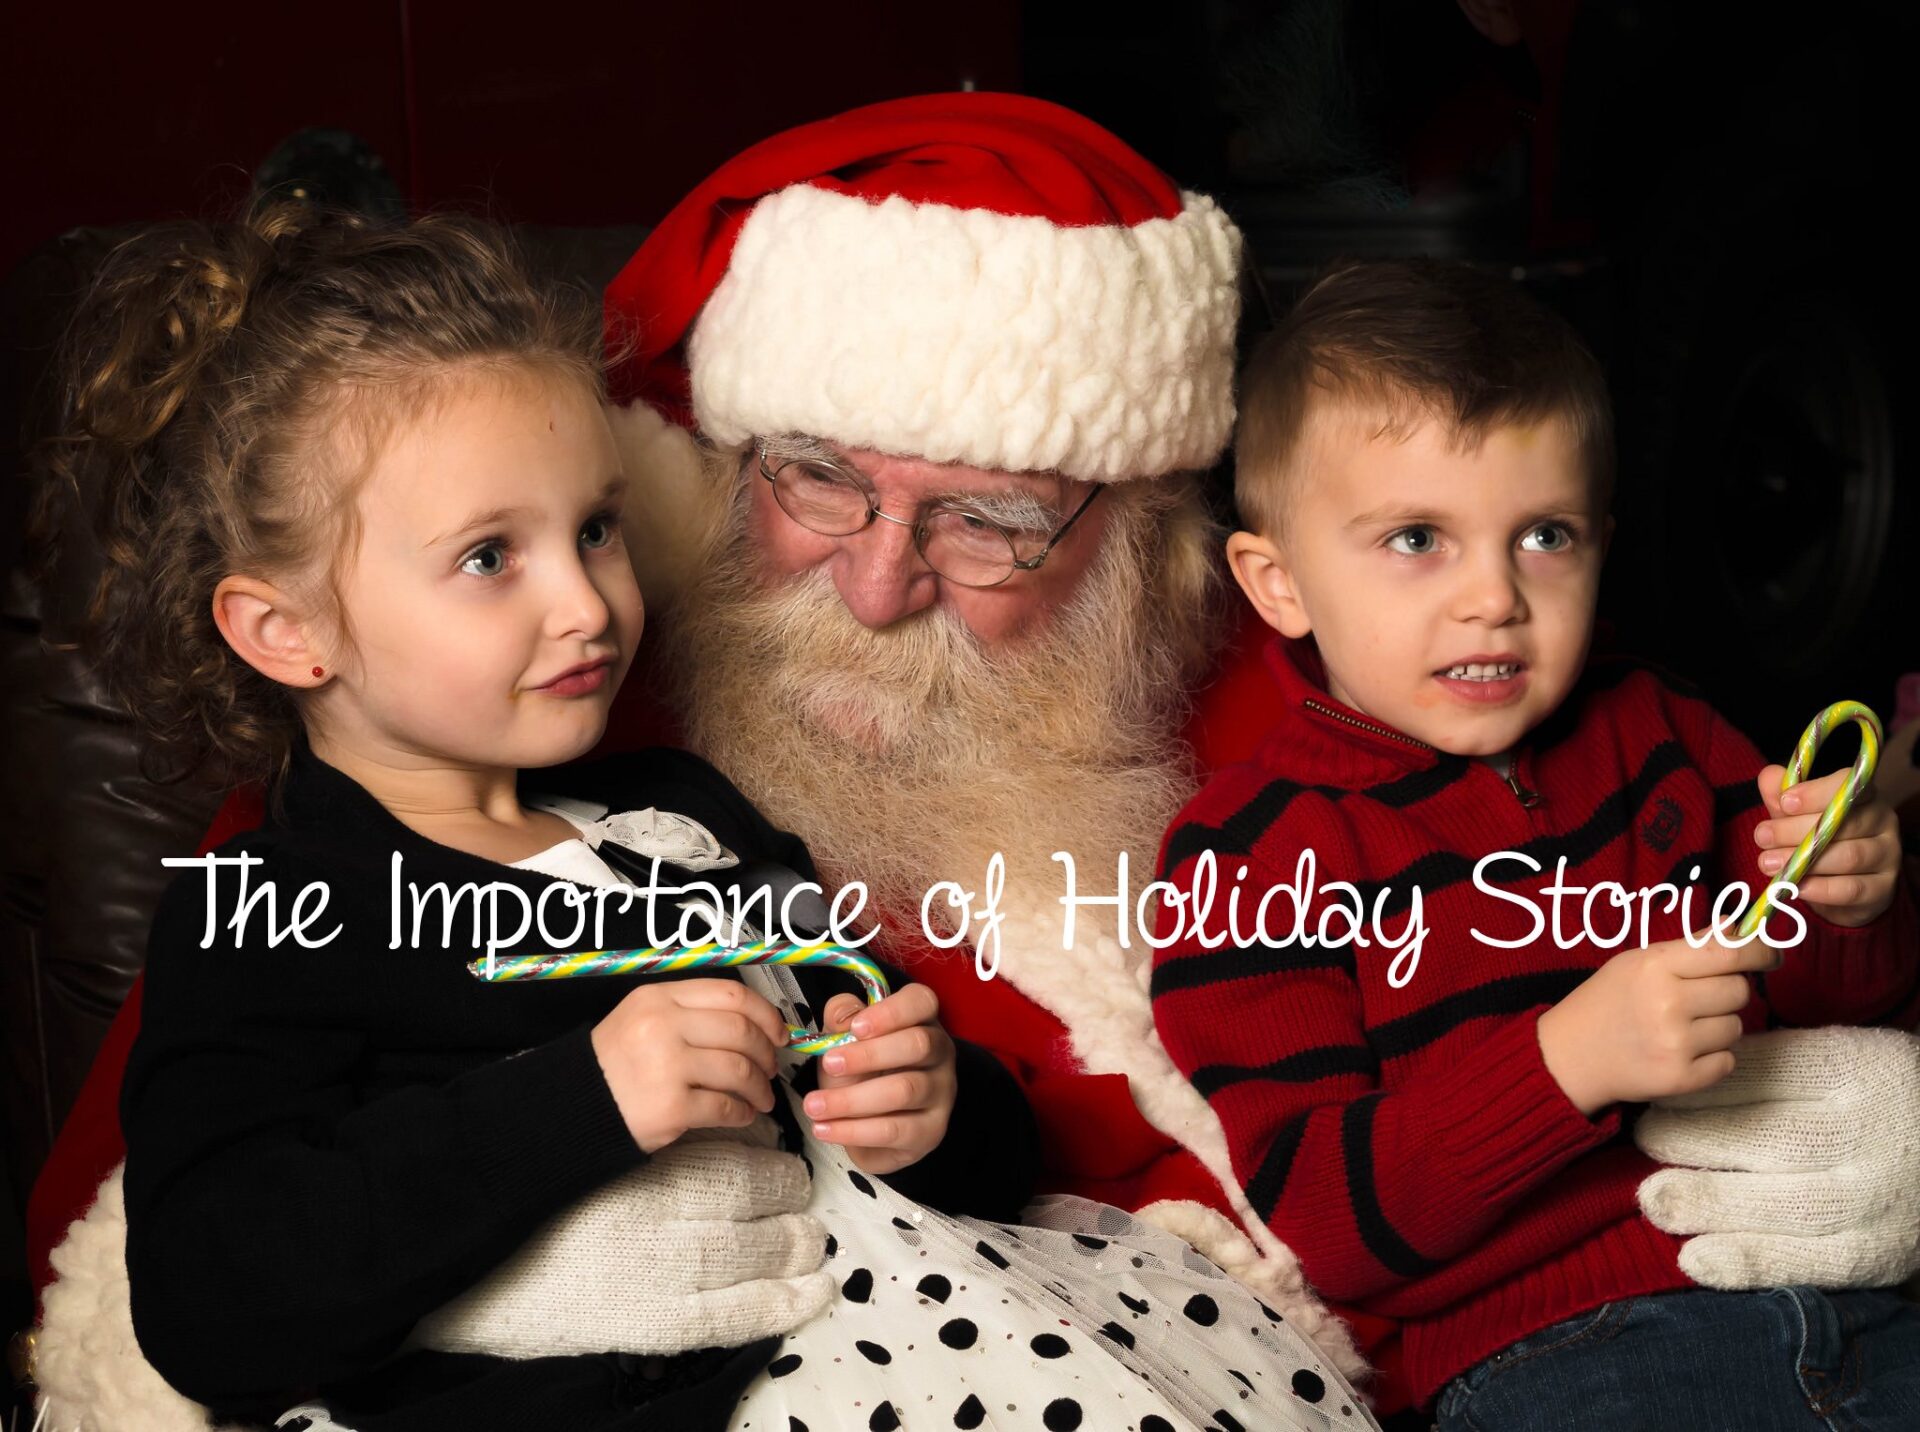 The importance of holiday stories